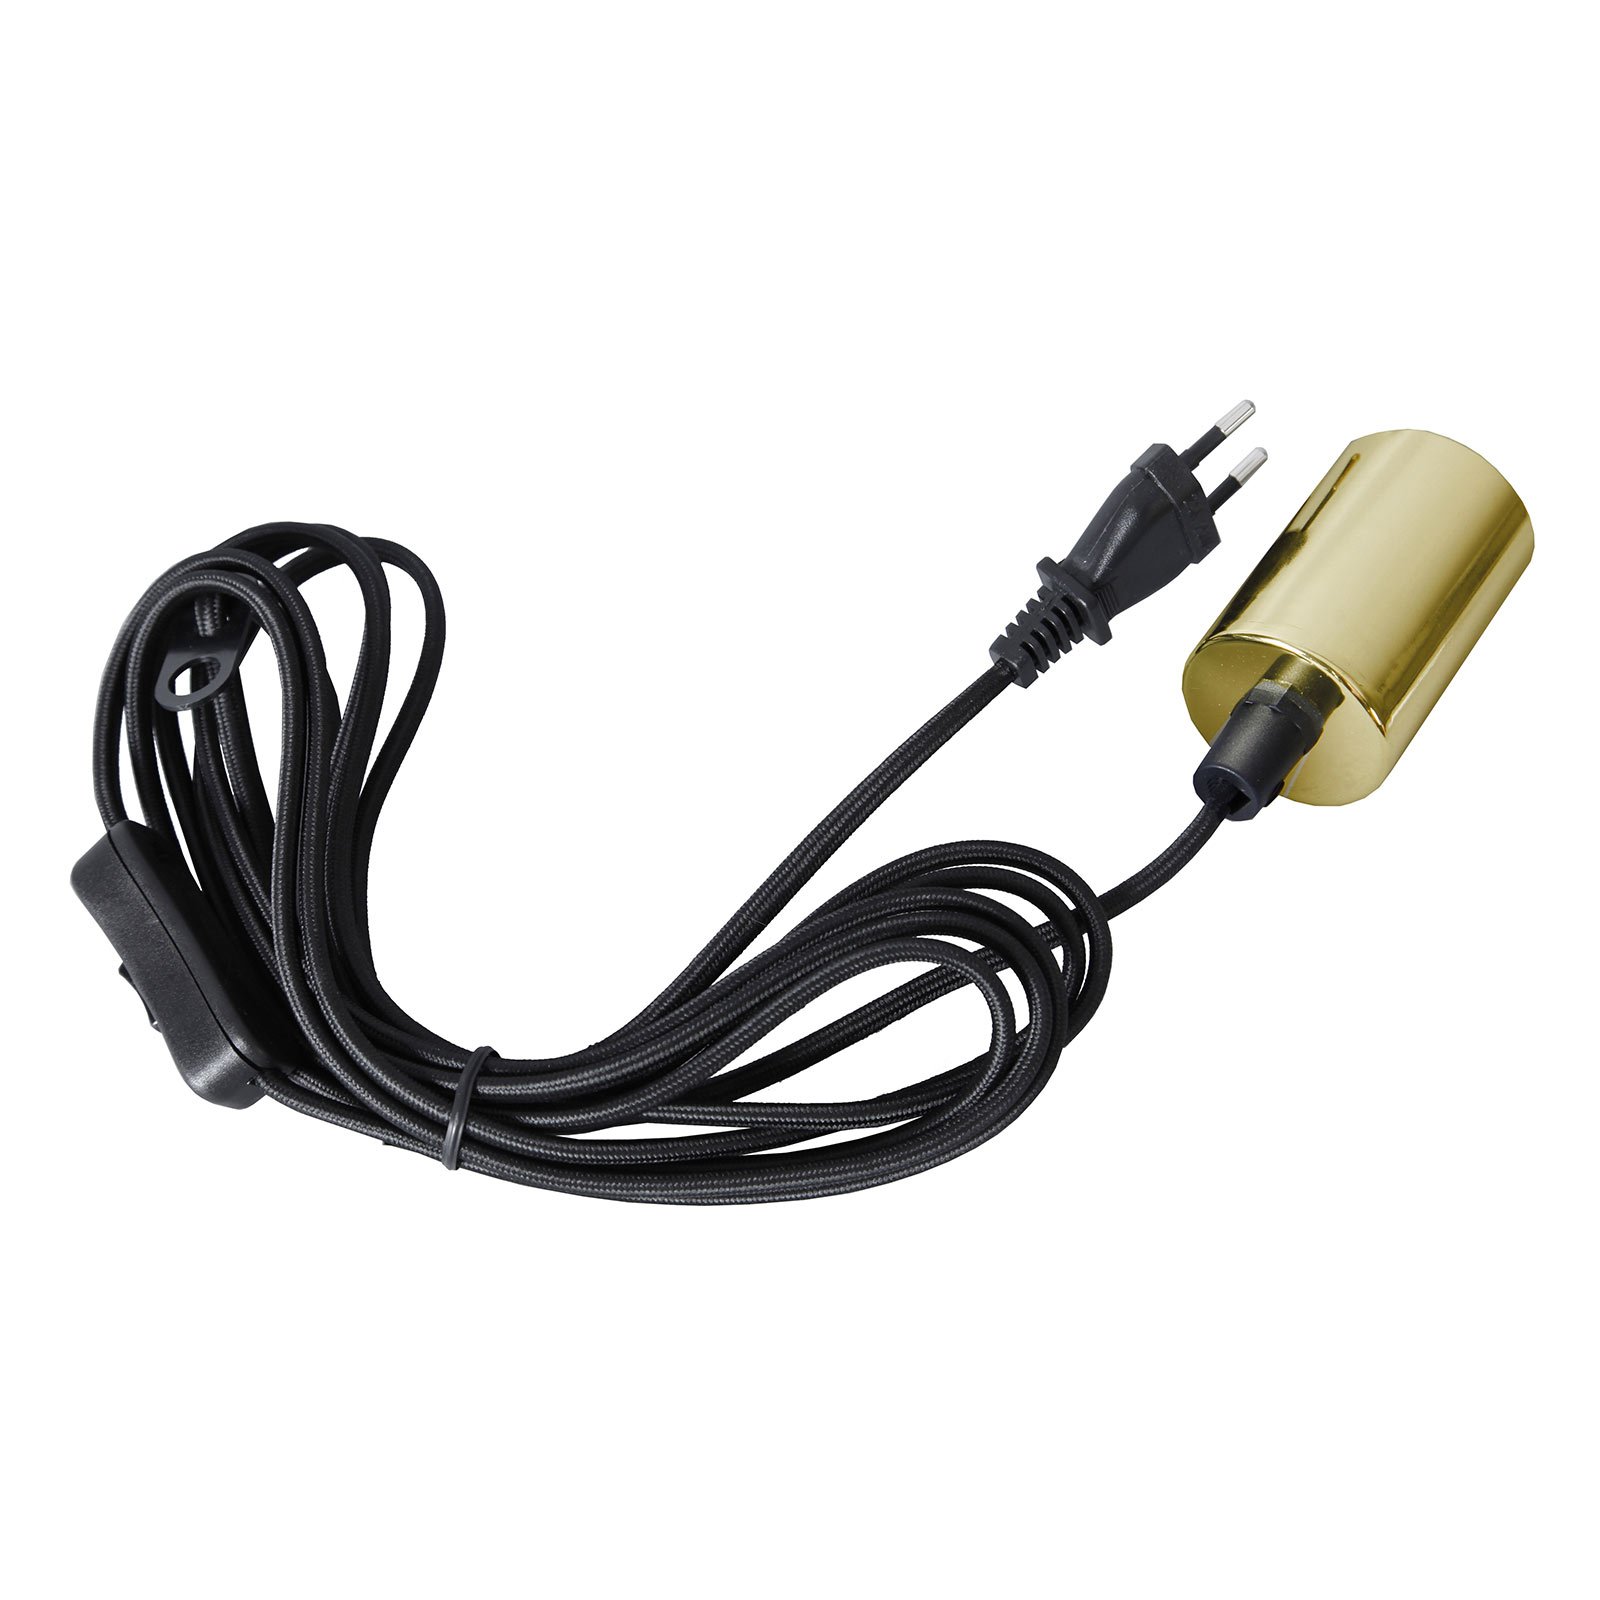 Stil E27 socket with cable, gold-coloured